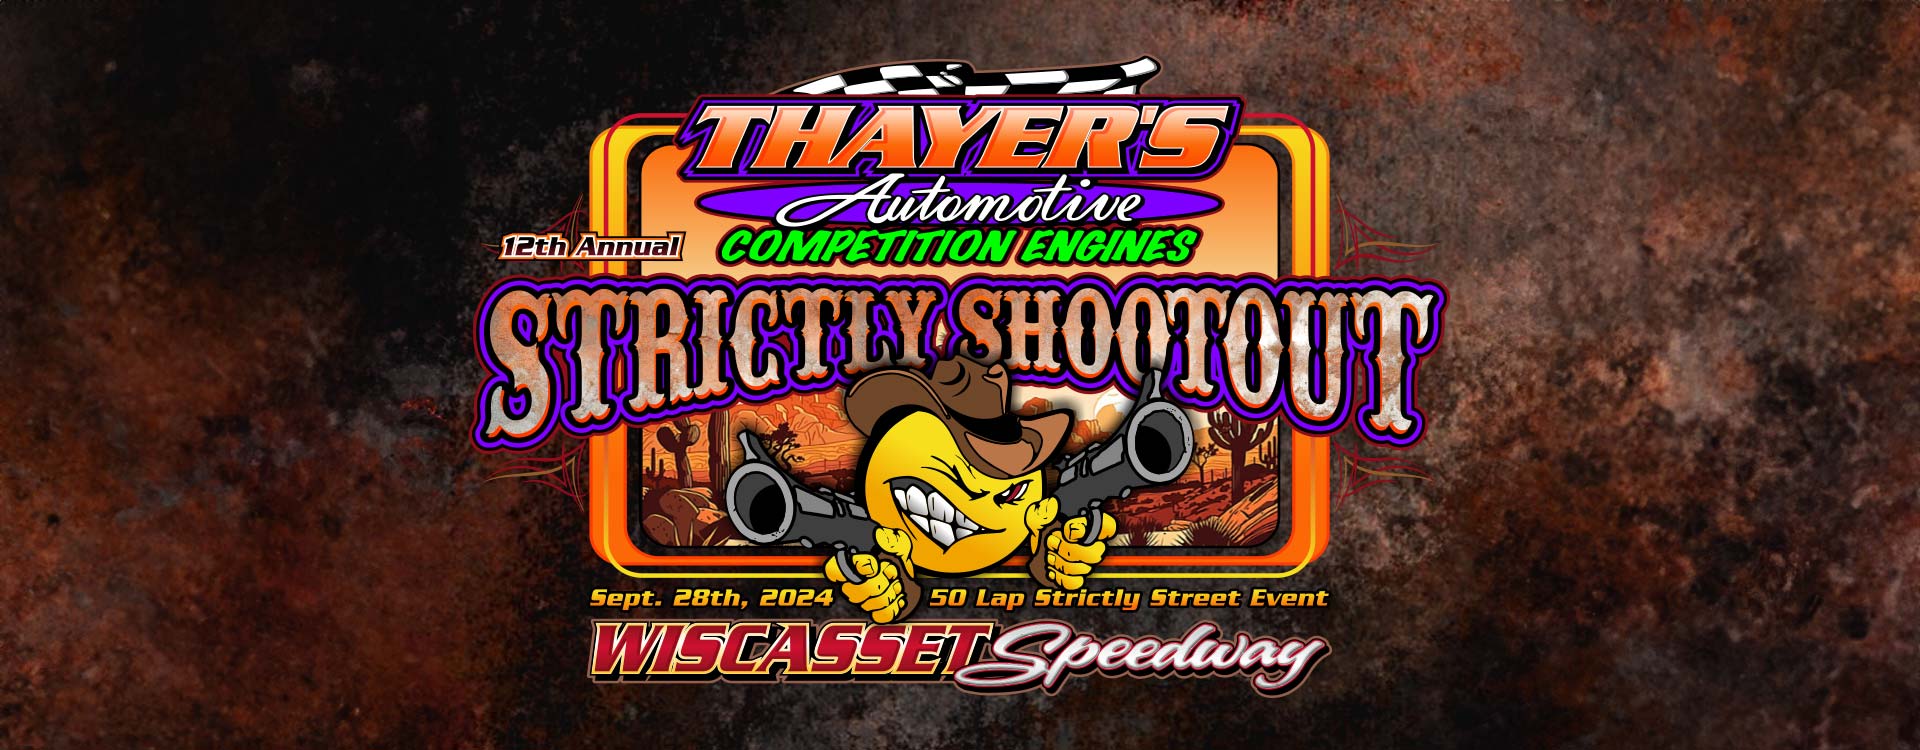 12th annual Strictly Shootout at the Wiscasset Speedway on September 28th